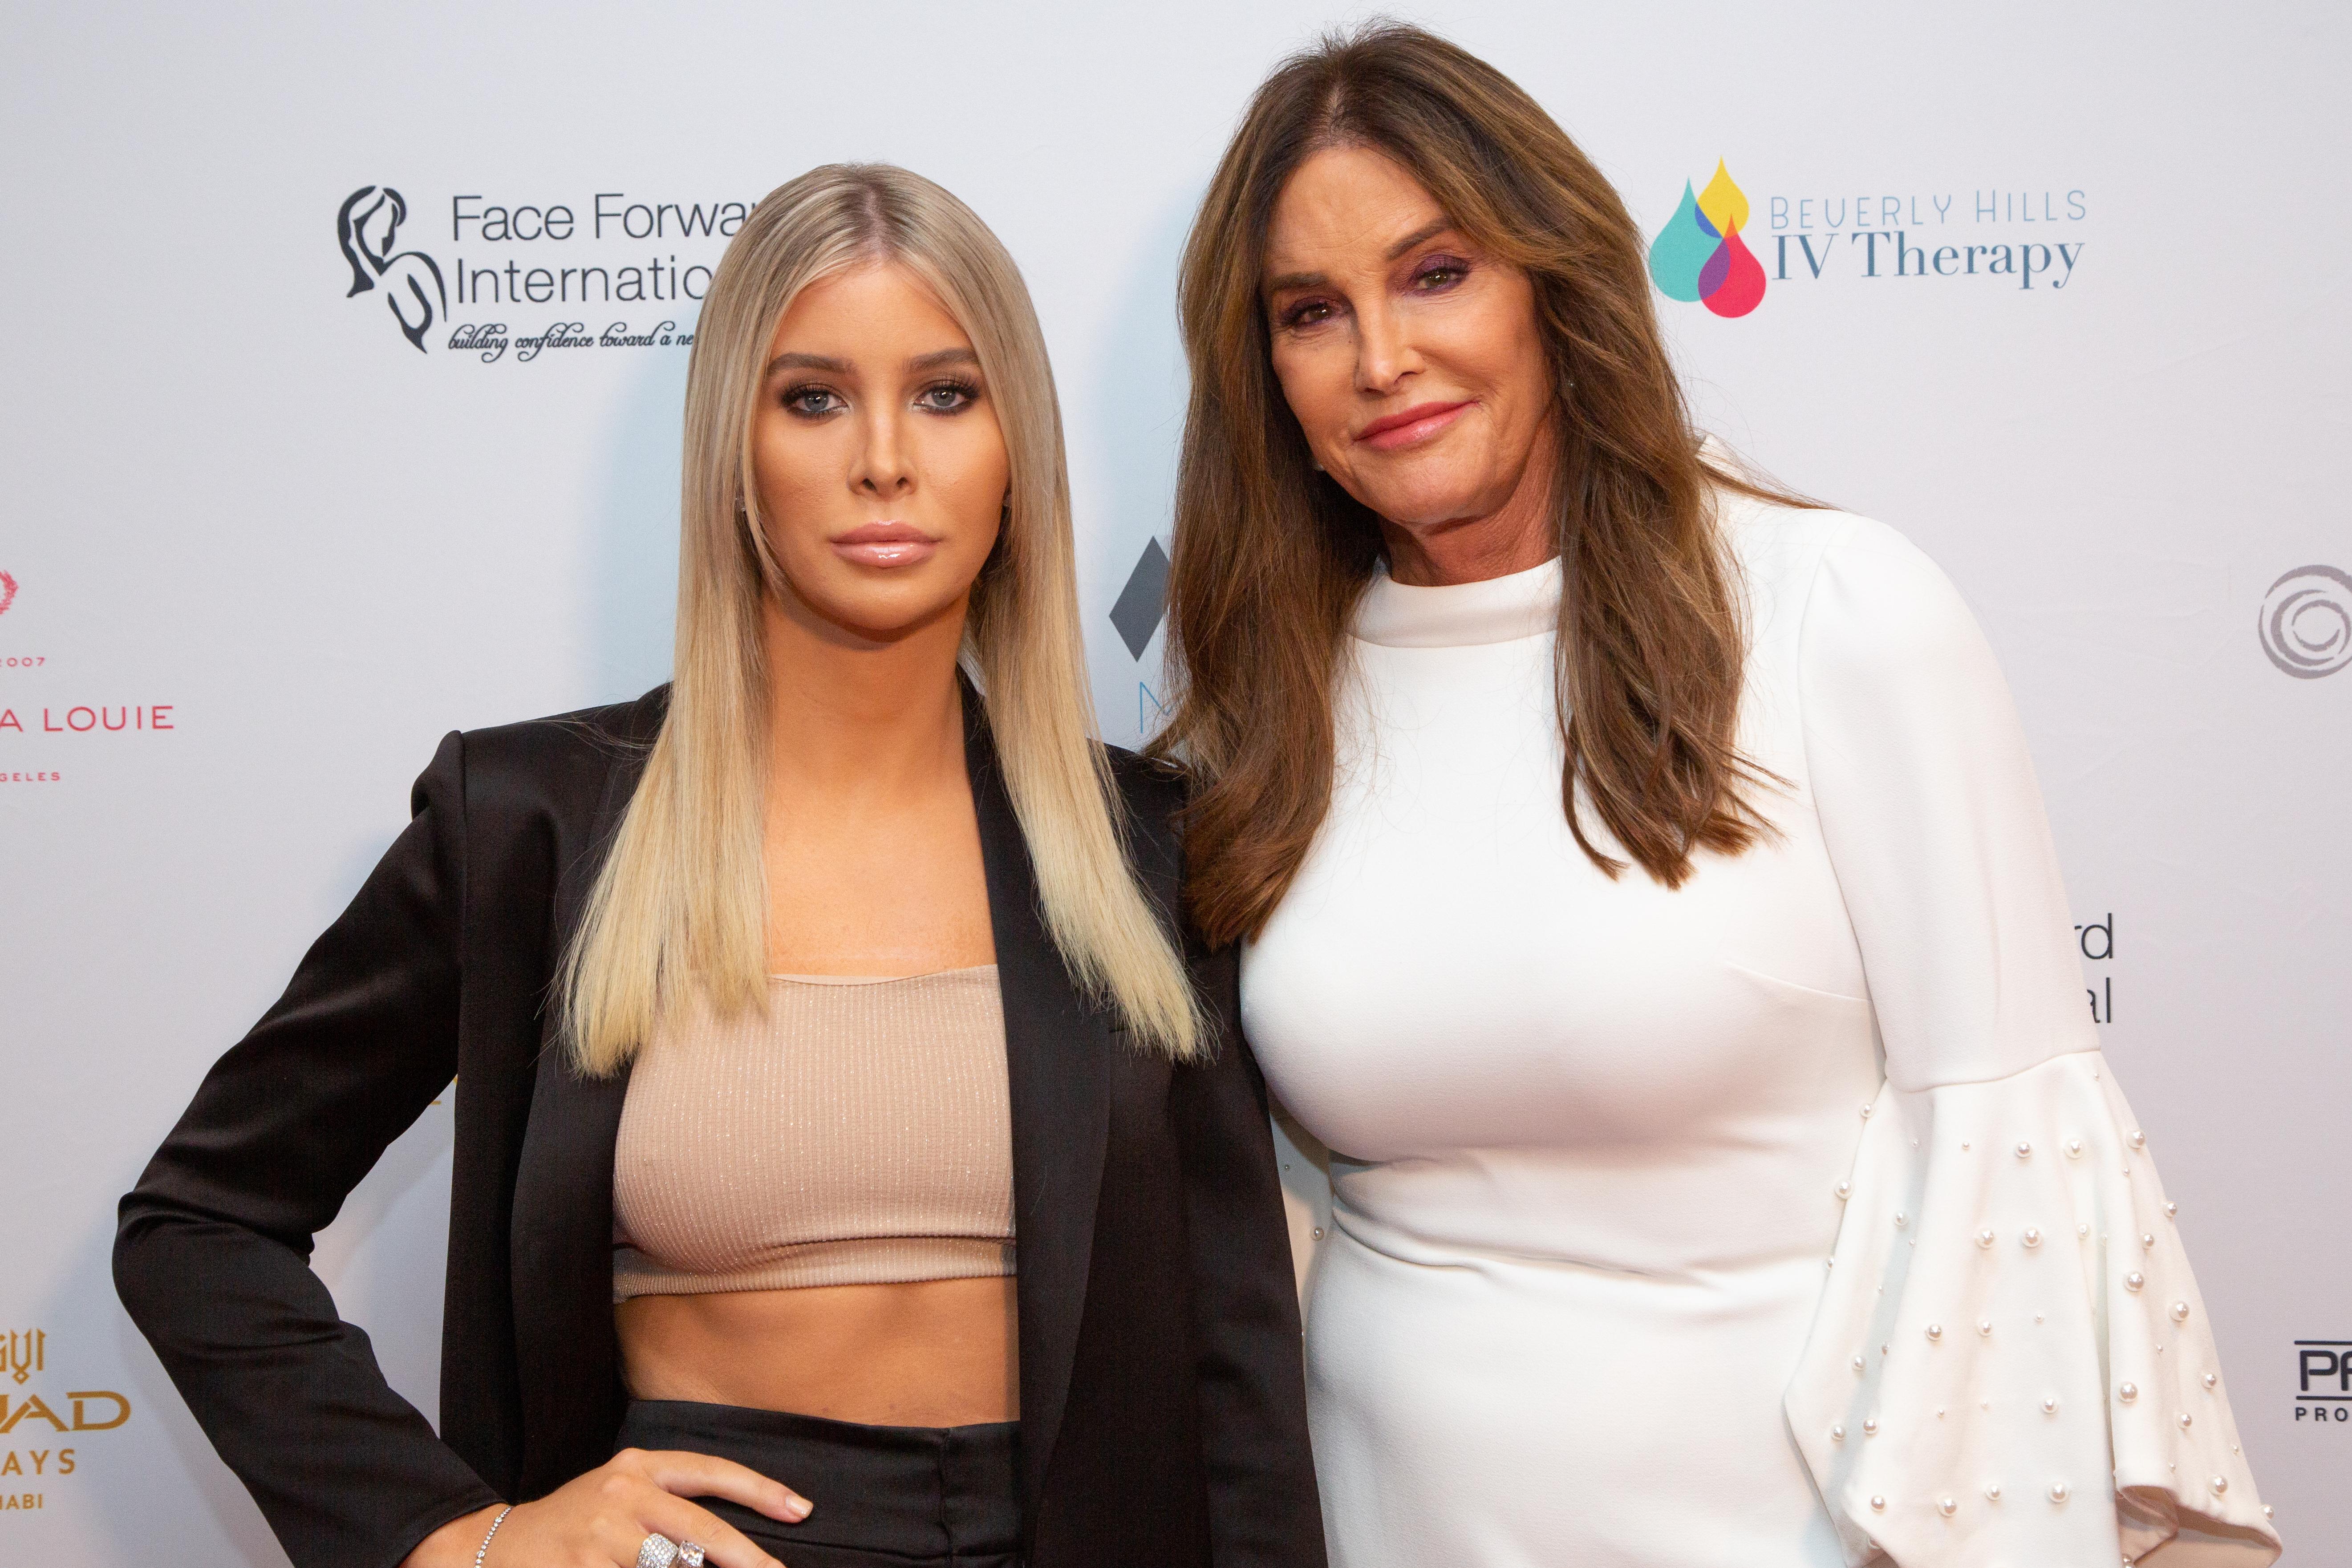 Caitlyn Jenner Is ‘Done’ With Marriage, According To Her Manager Sophia Hutchins